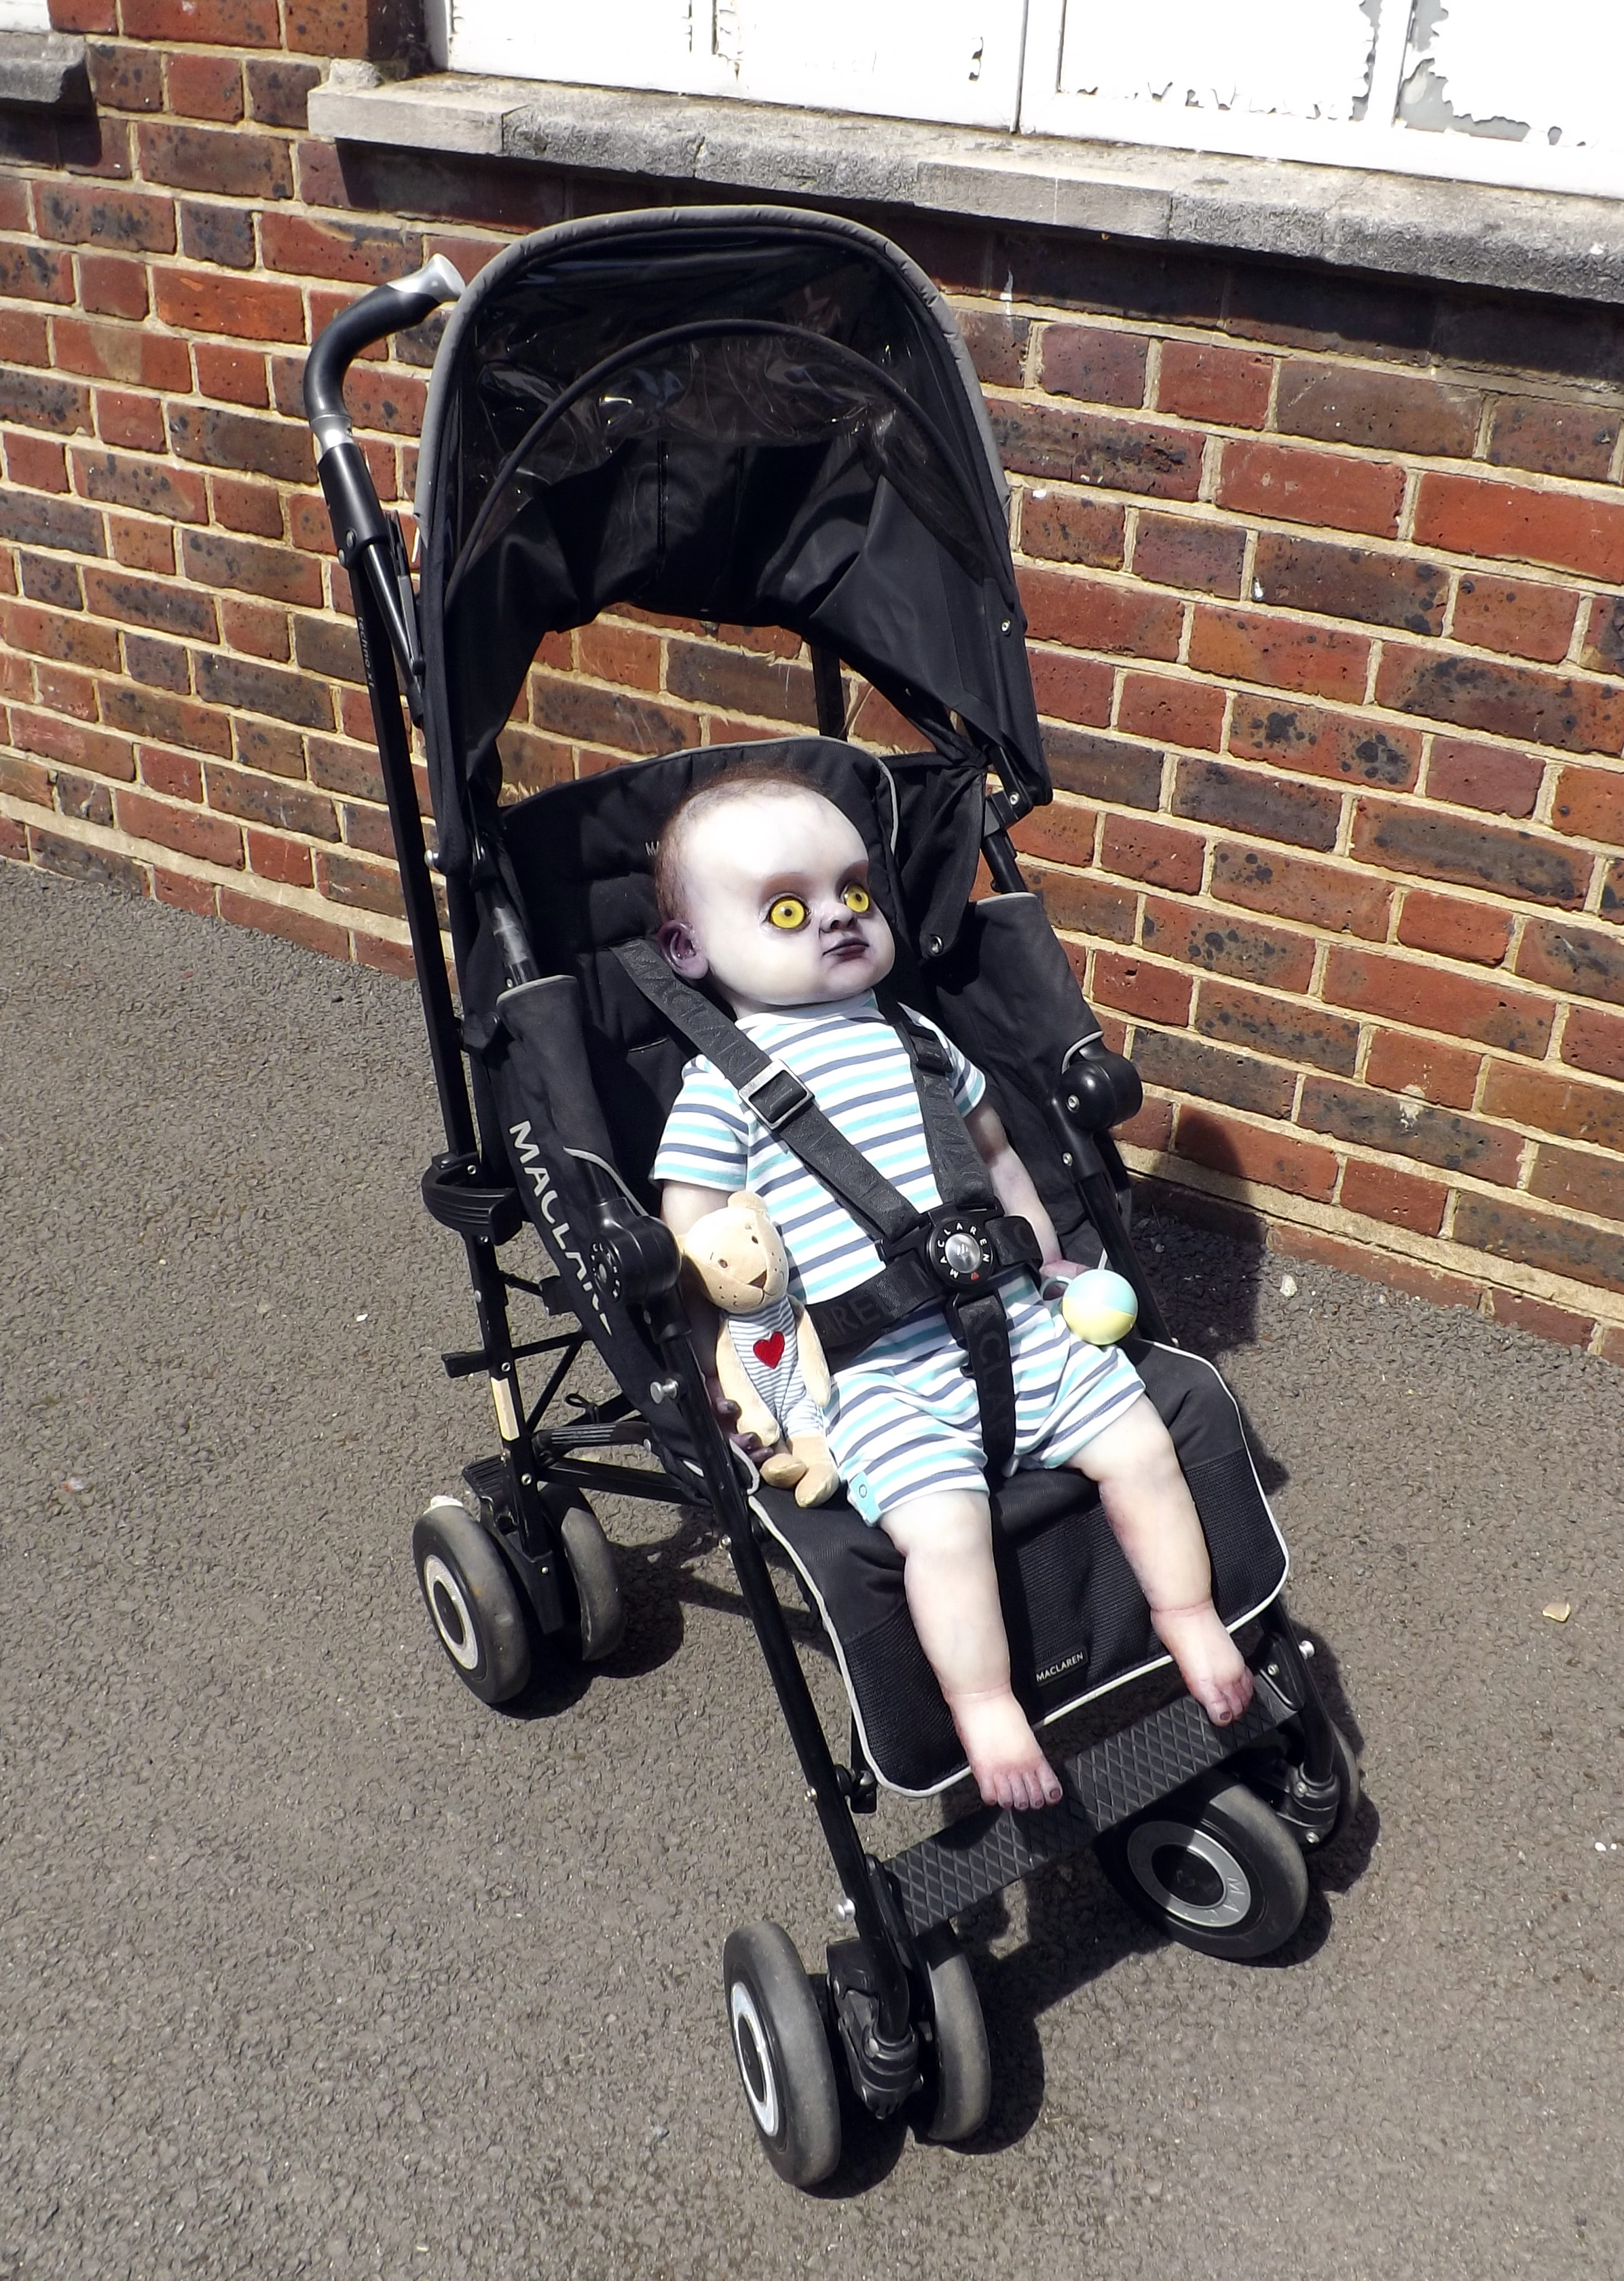 Finished and dressed full body changeling baby prop in push chair